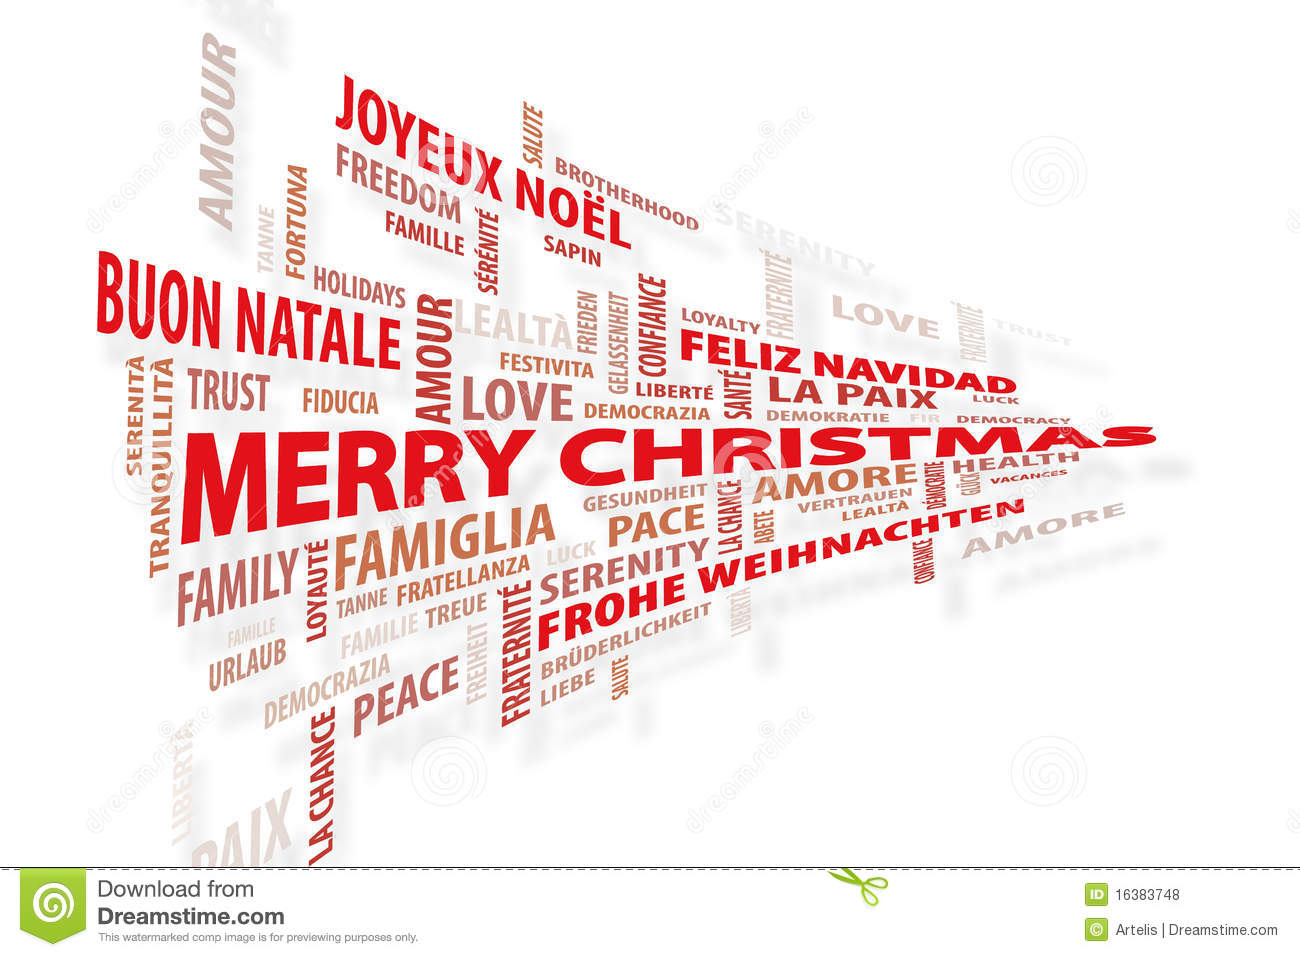 Christmas Wall Of Words Royalty Free Stock Photos   Image  16383748